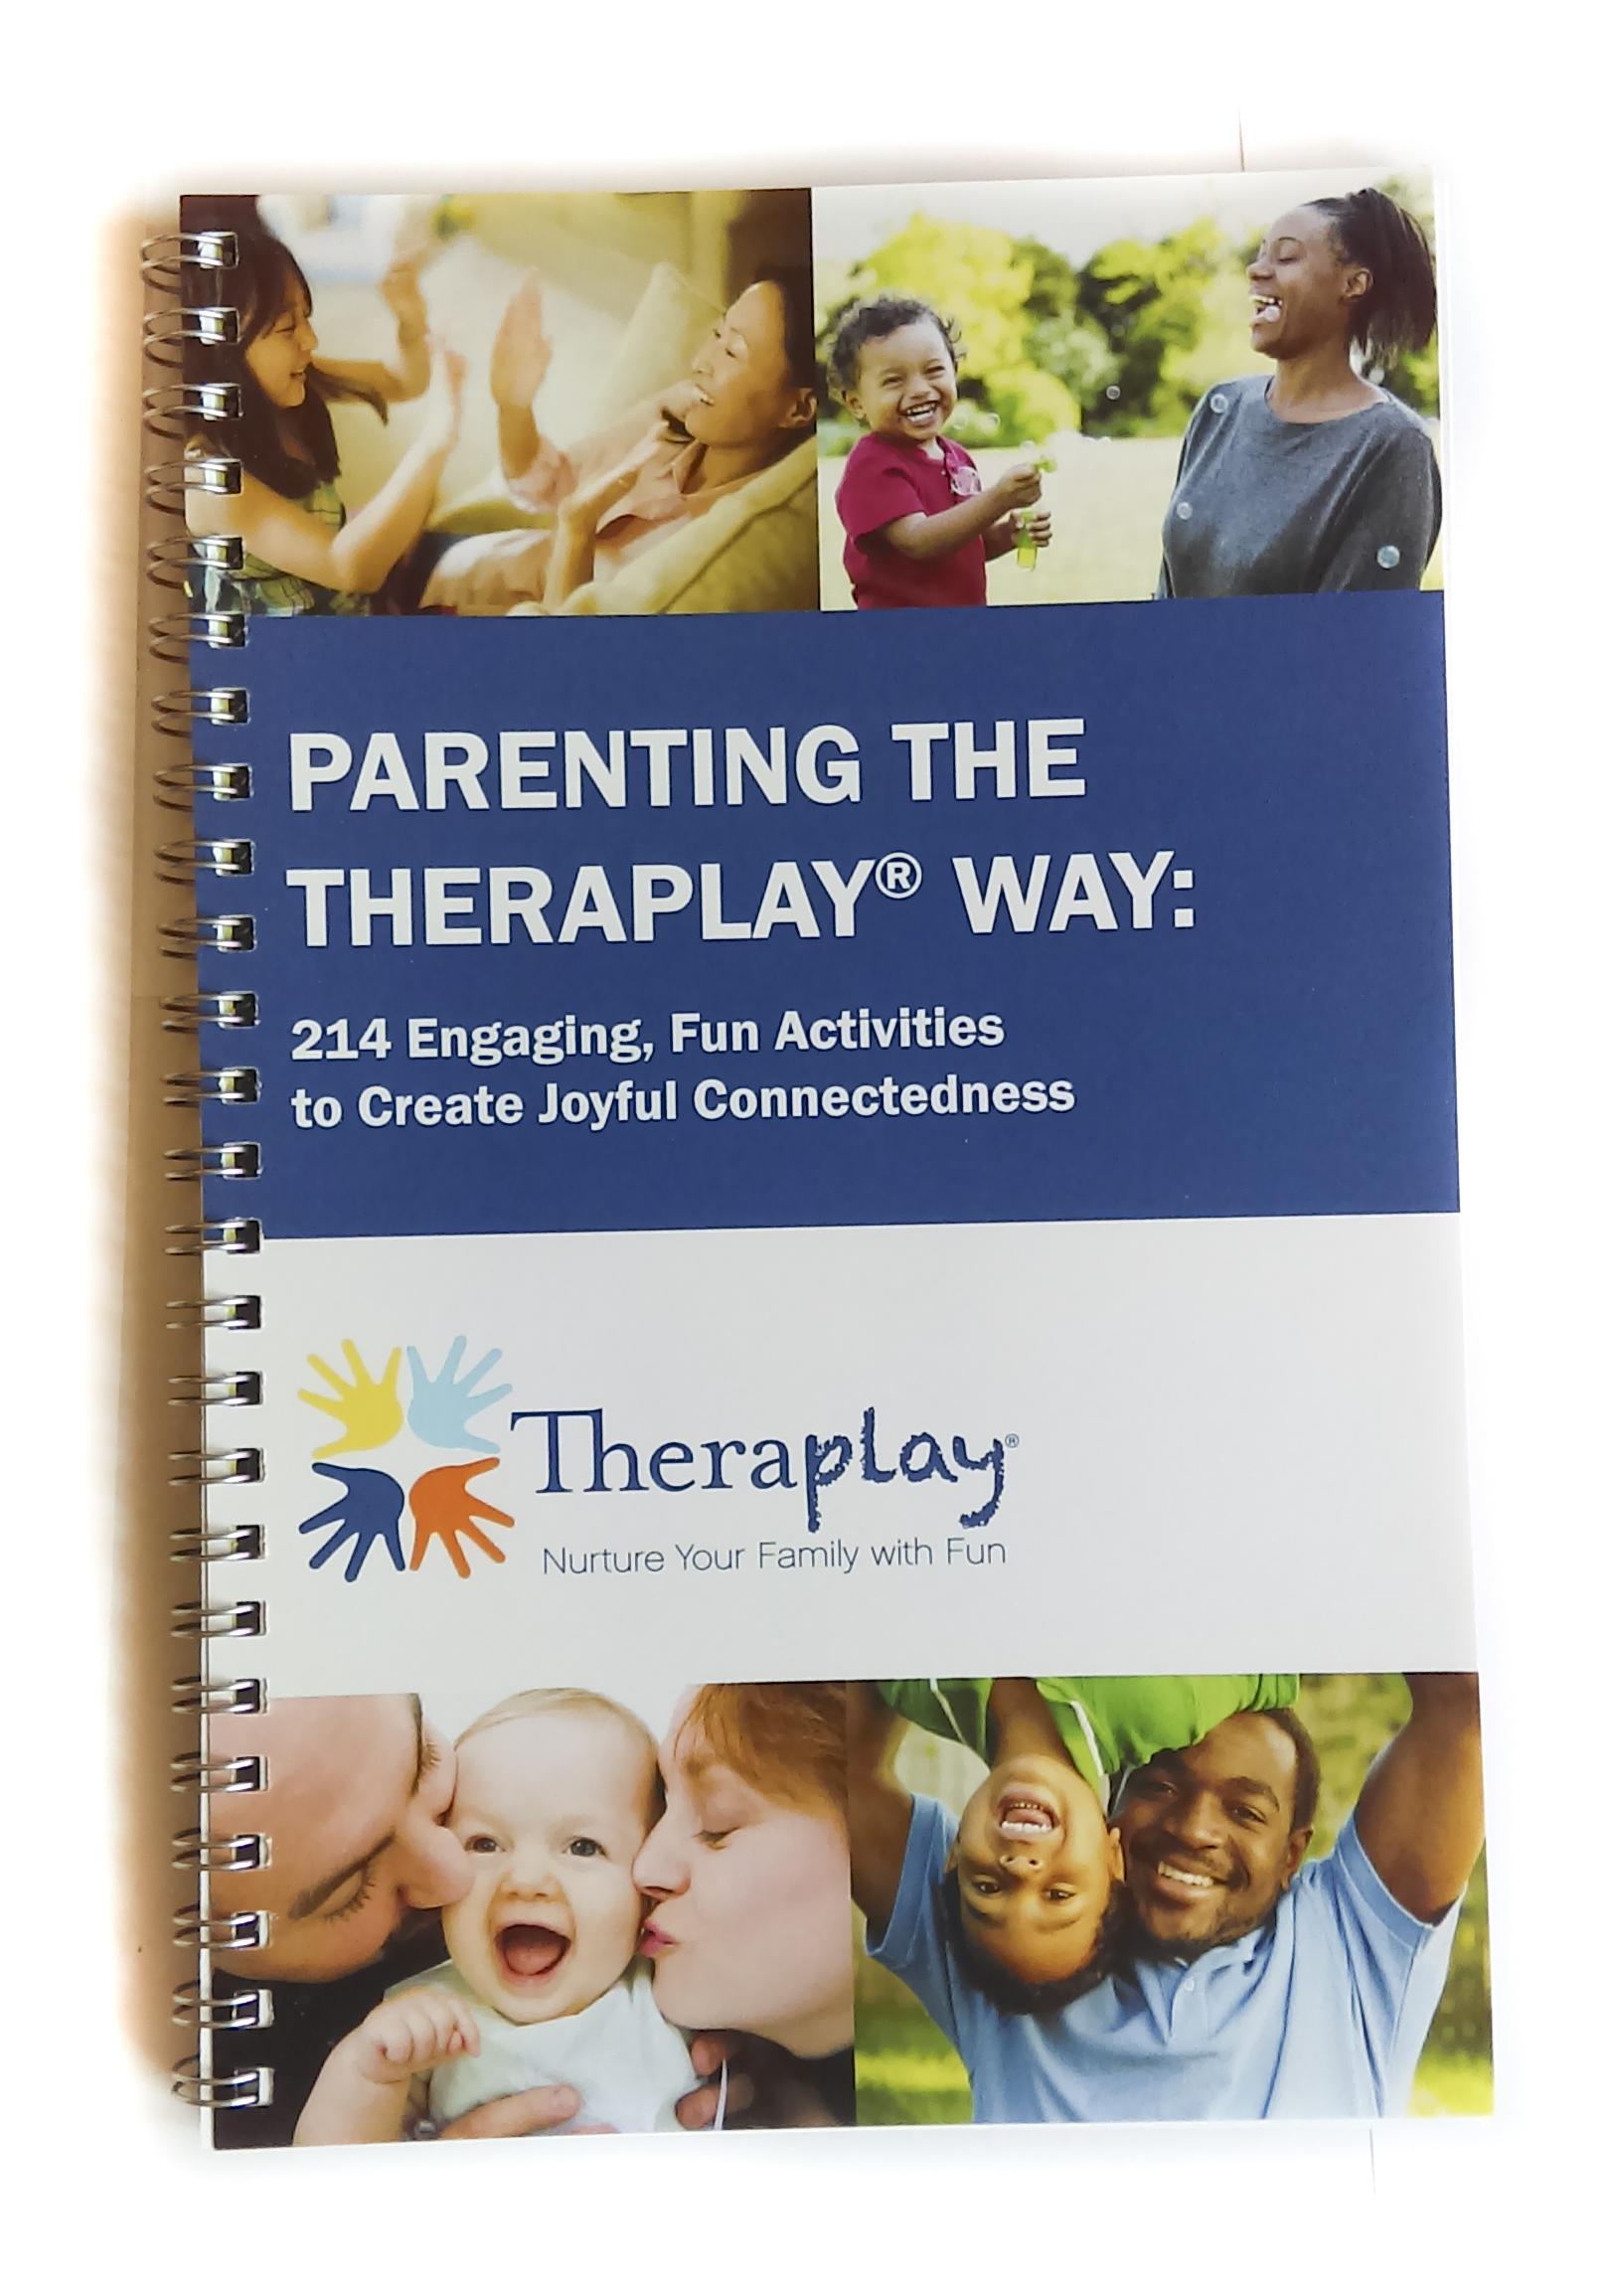 Parenting the Theraplay Way